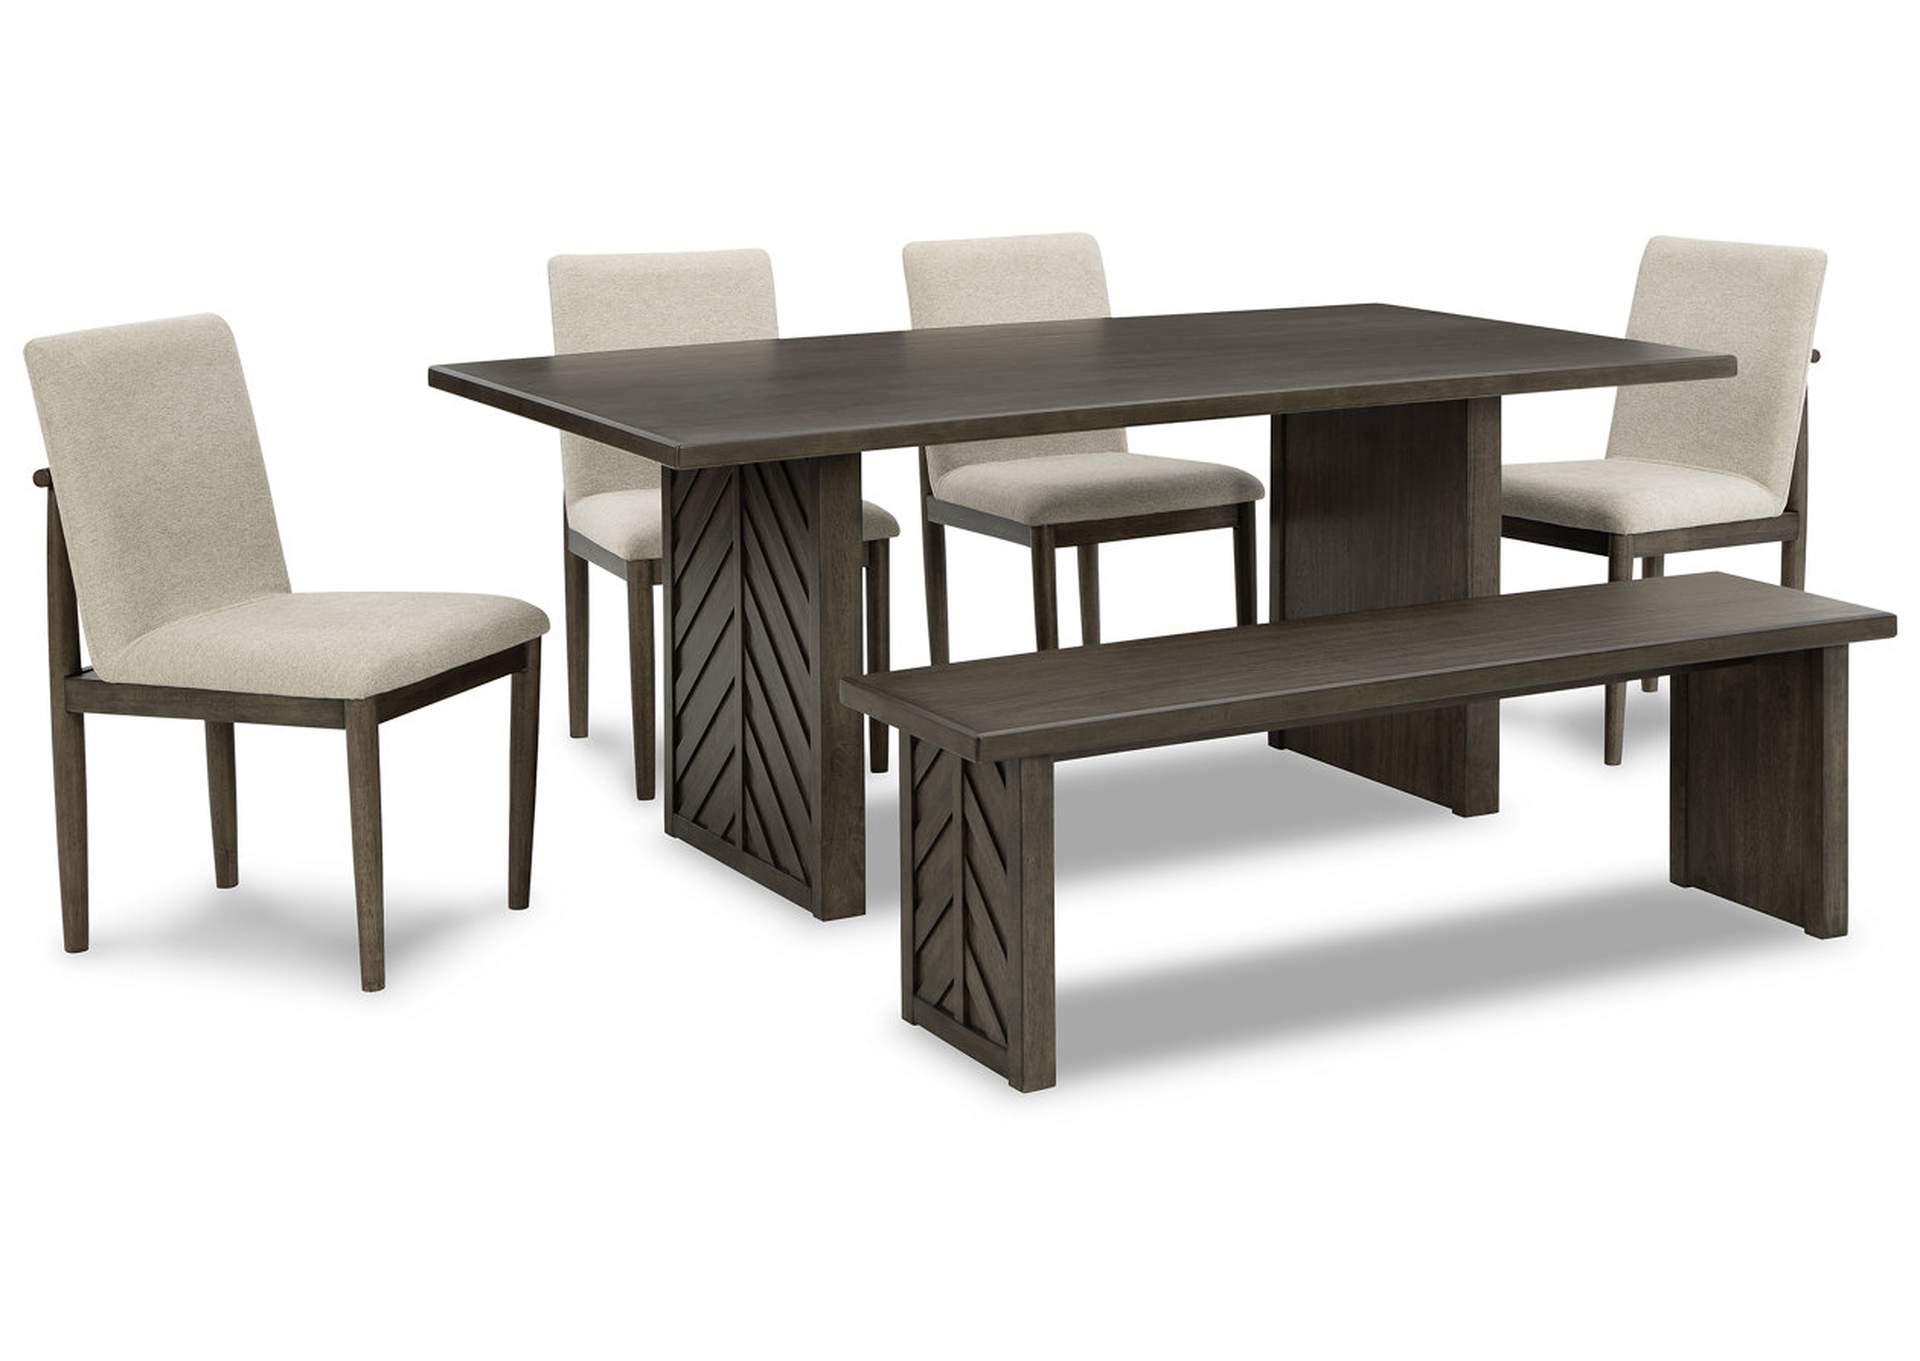 Arkenton Dining Table and 4 Chairs and Bench,Ashley